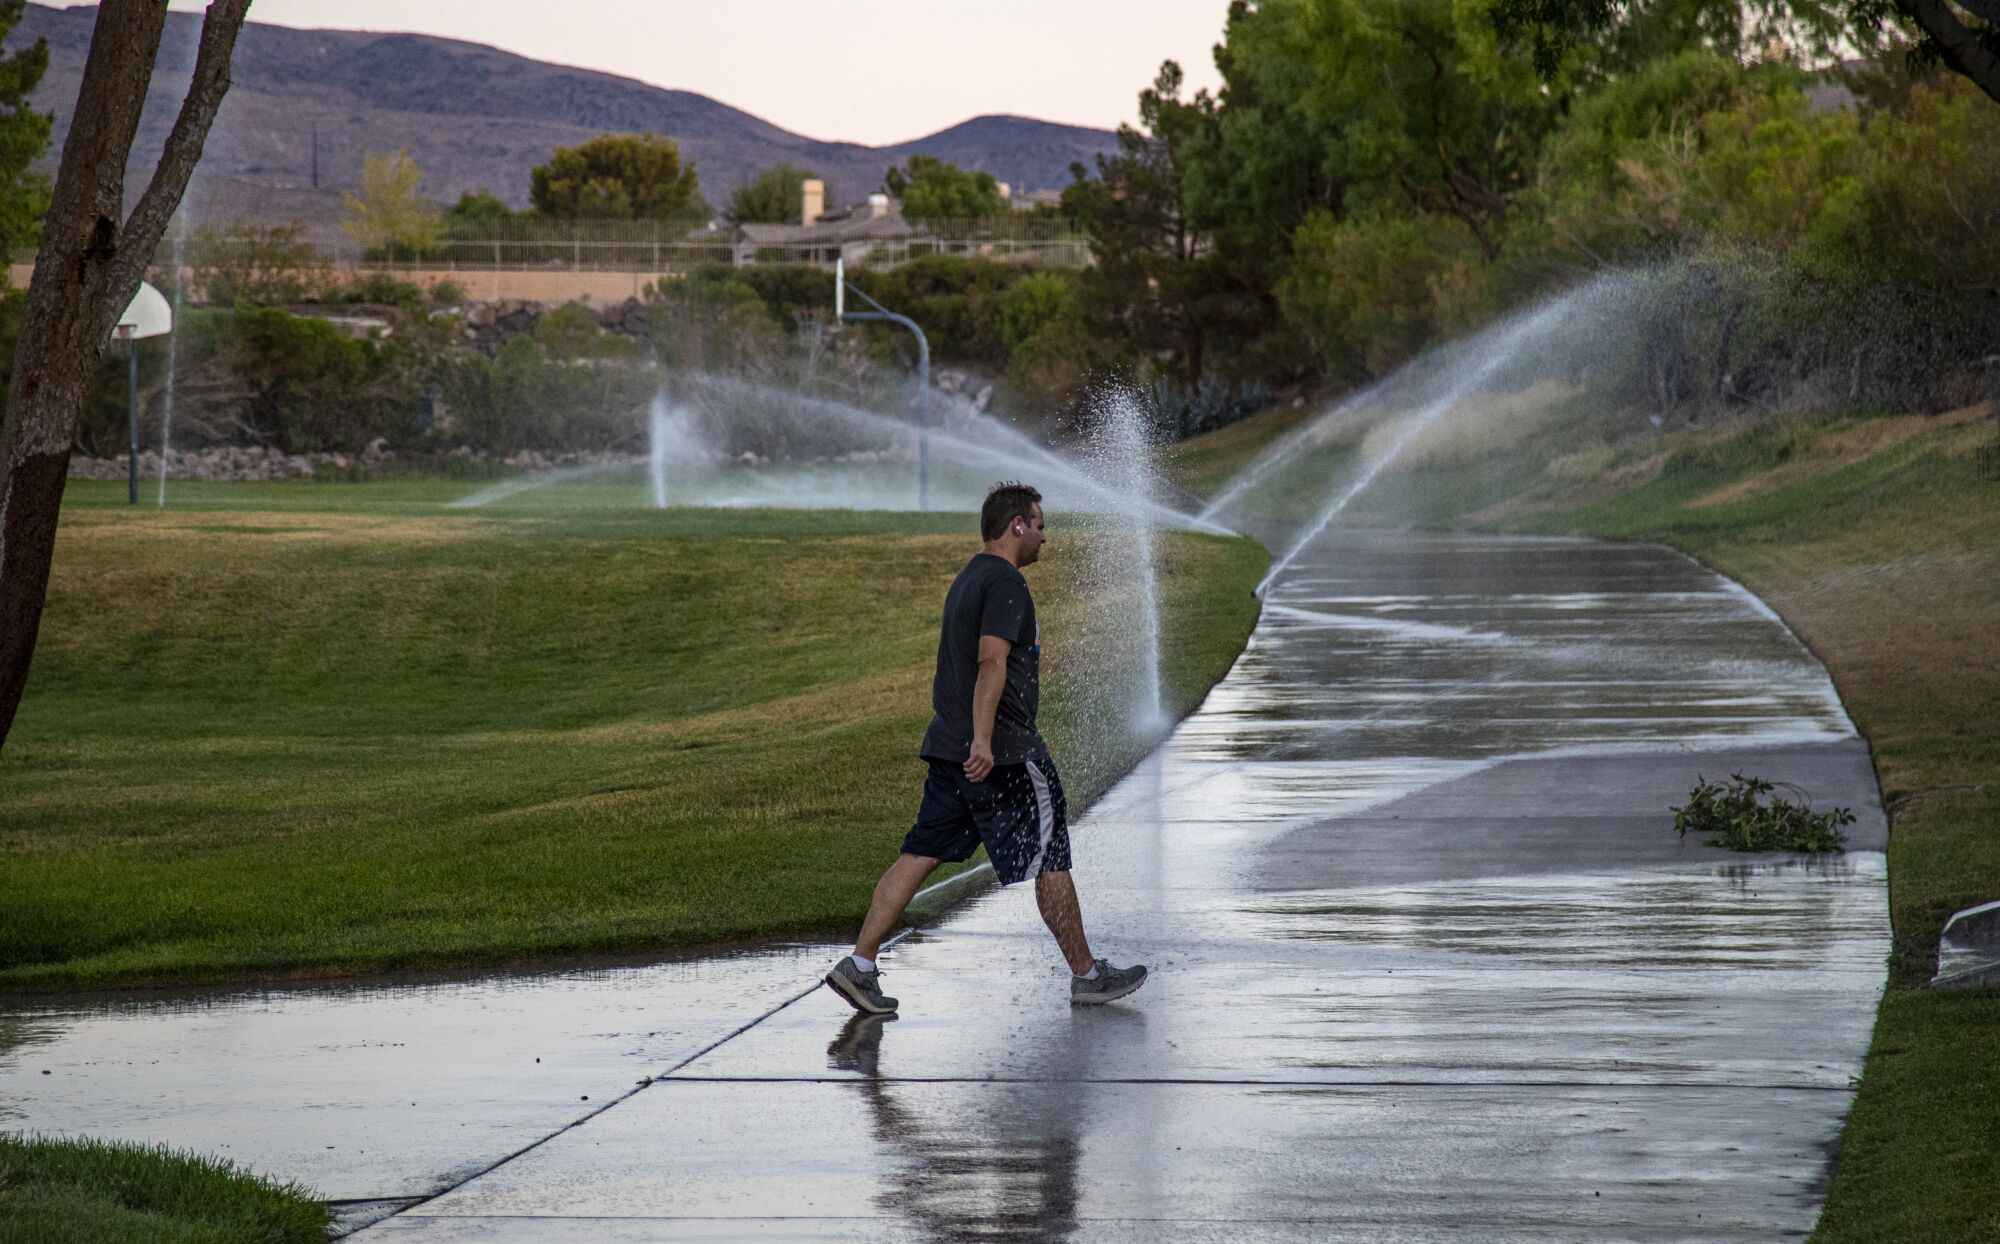 A resident walks in a park as sprinklers water the grass 